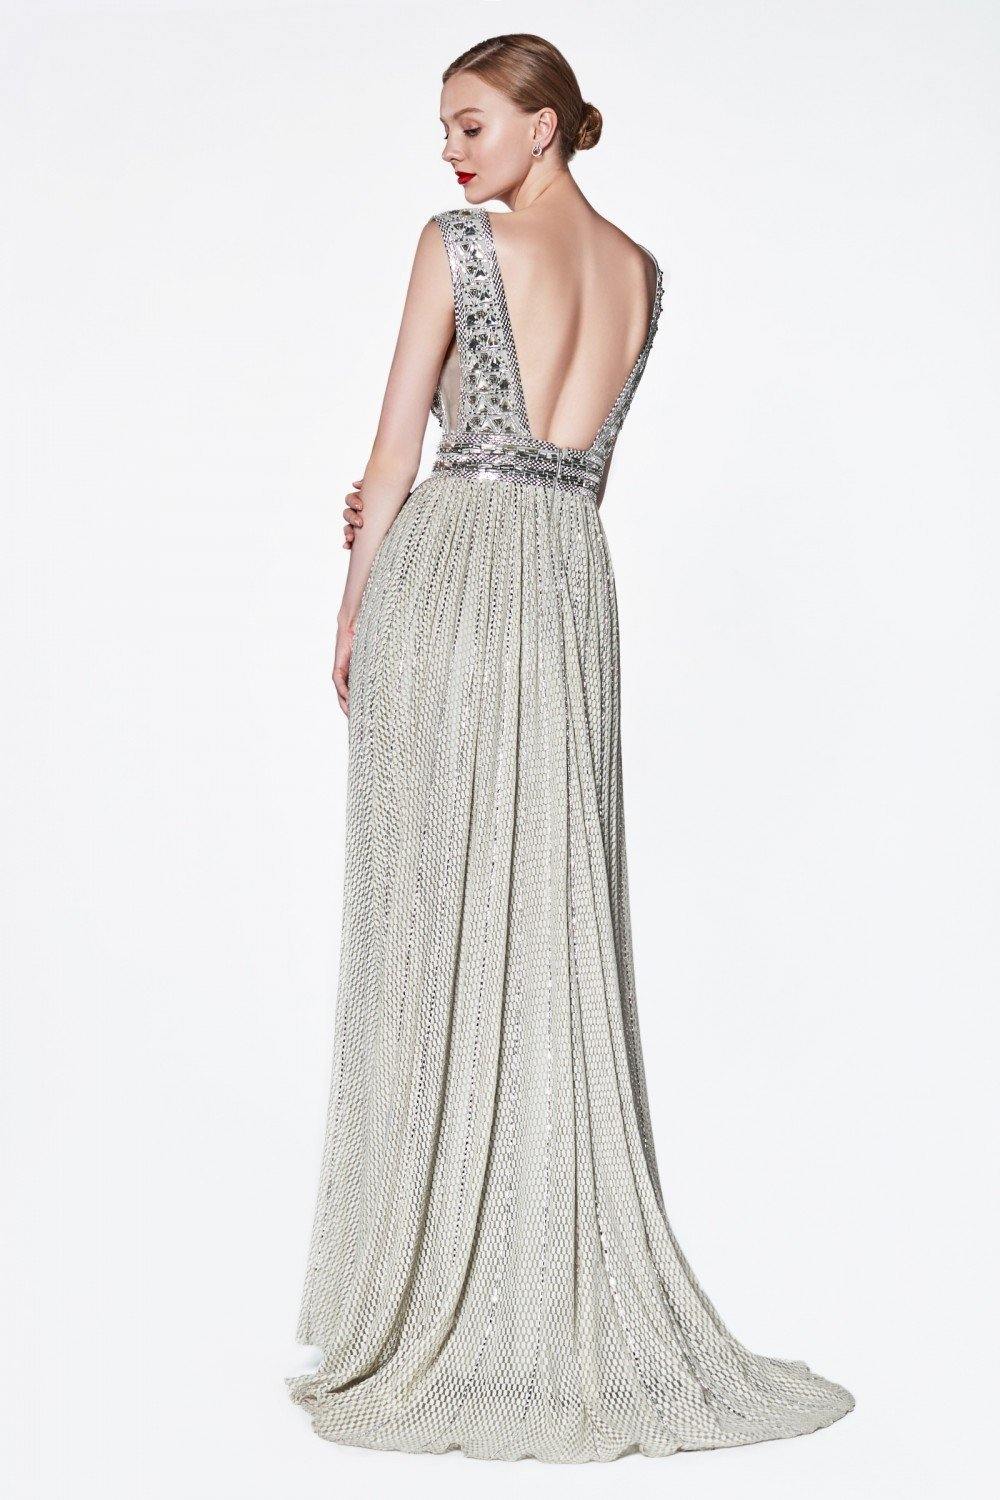 Prom Long Dress Evening Gown - The Dress Outlet